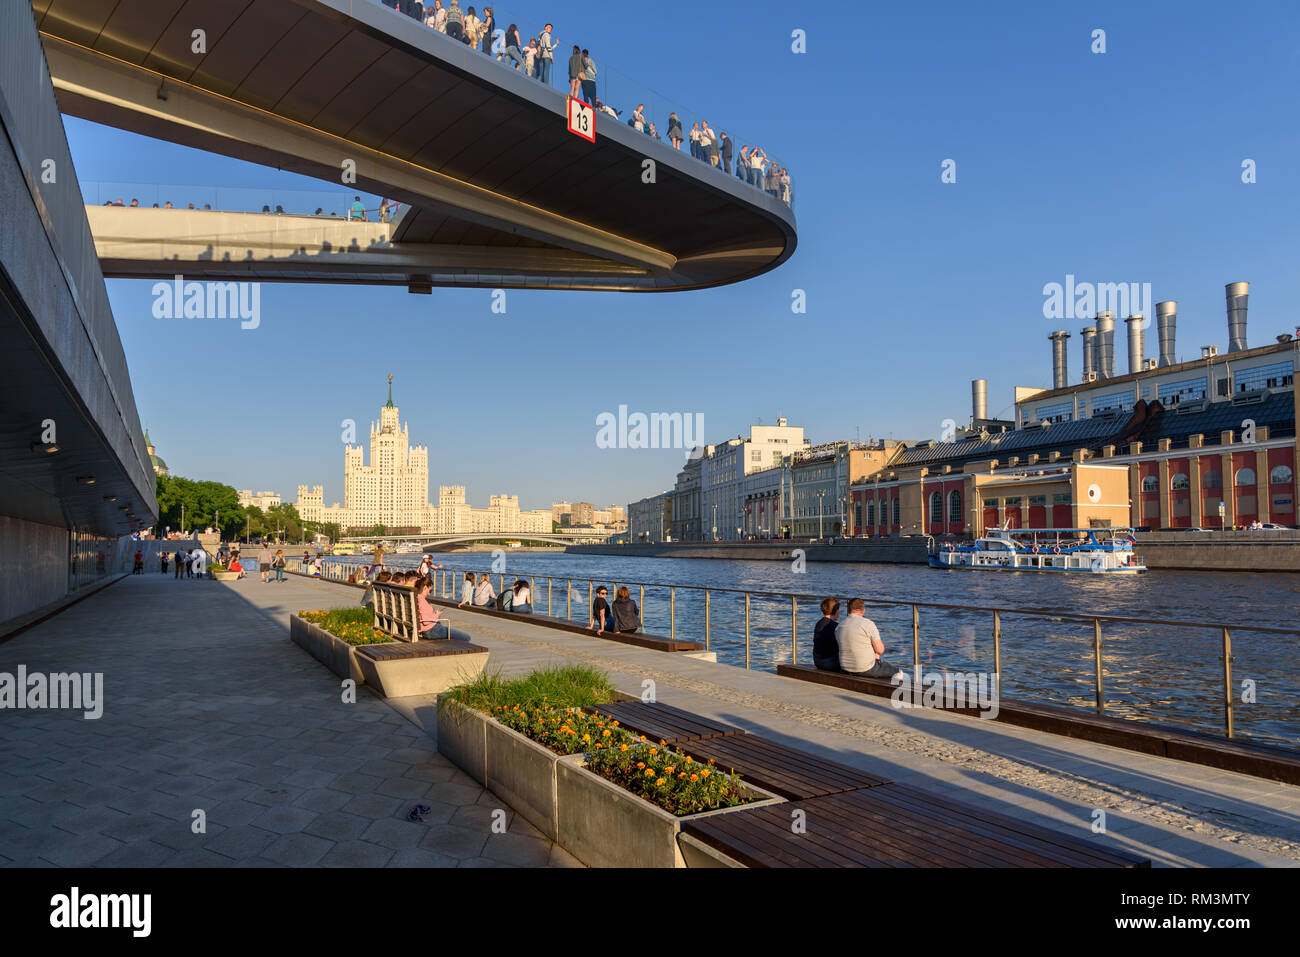 Moscow, Russia -13 May 2018: Floating Bridge over the embankment of Moscow River, Zaryadye Park Stock Photo